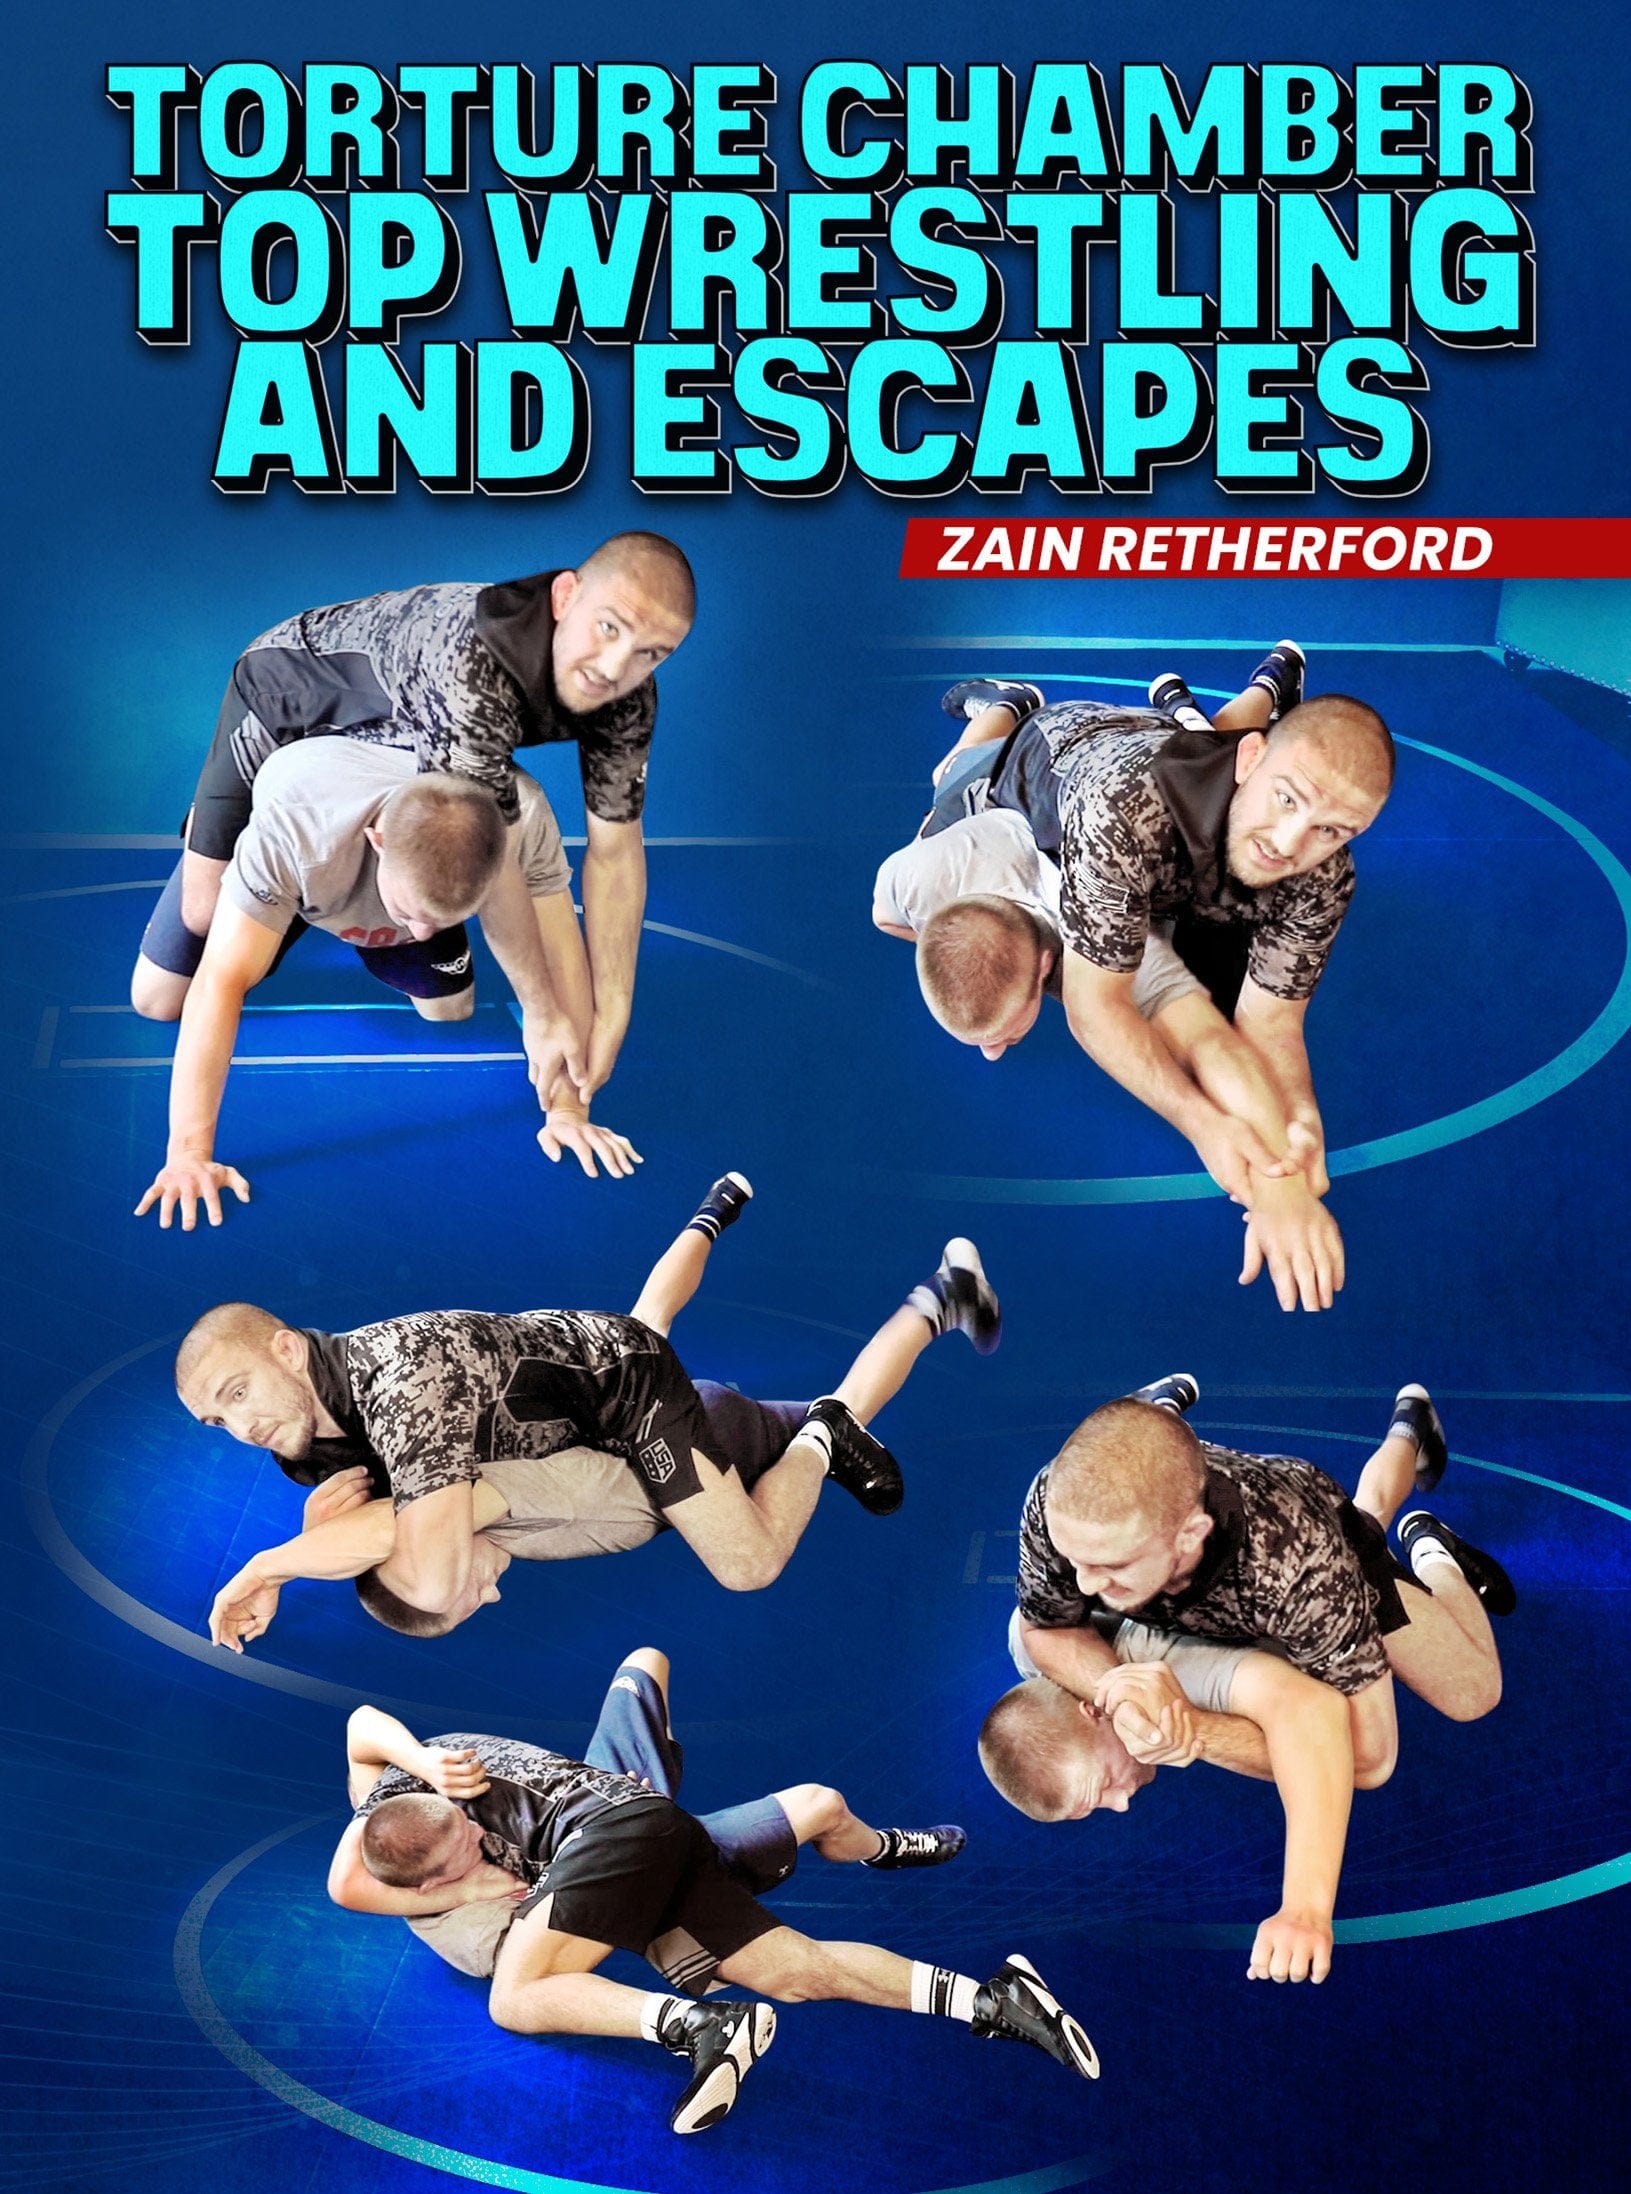 Torture Chamber Top Wrestling and Escapes by Zain Retherford - Fanatic Wrestling